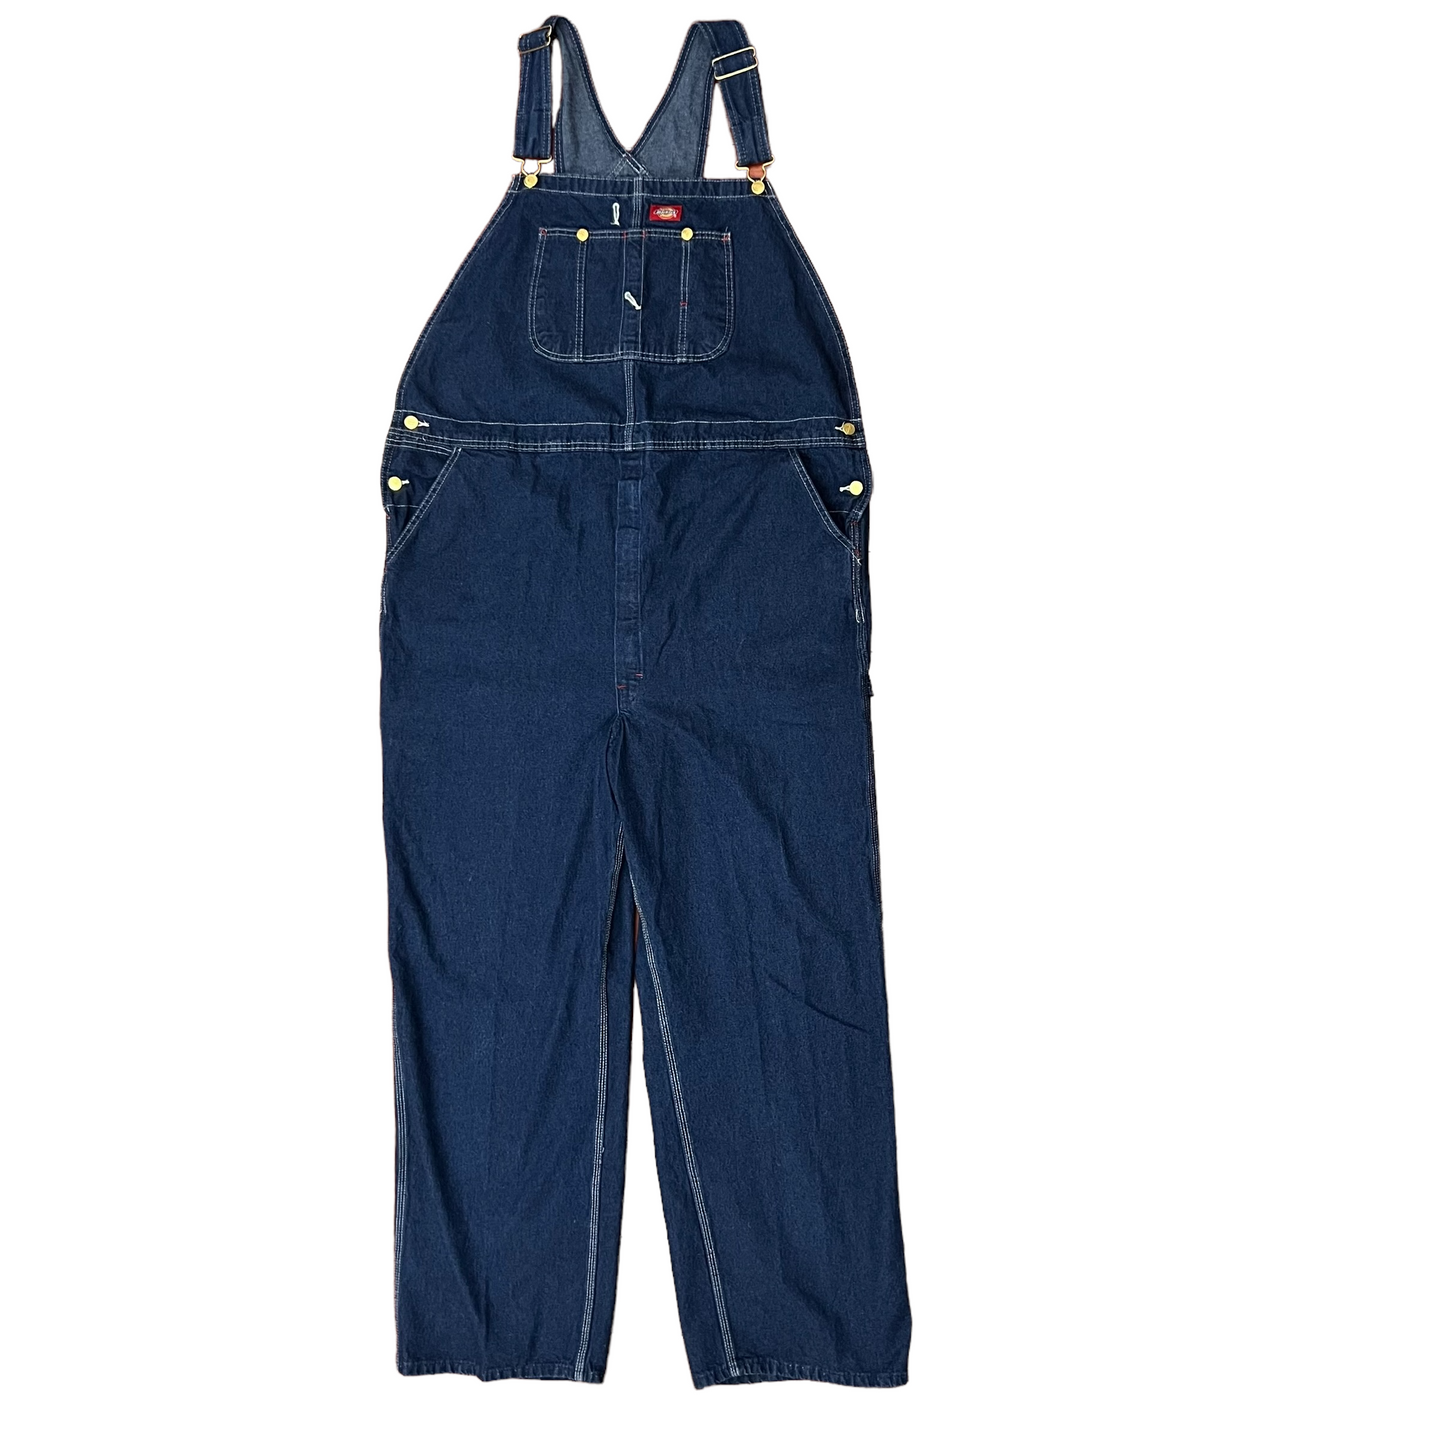 Dickies Overalls Size 44x32